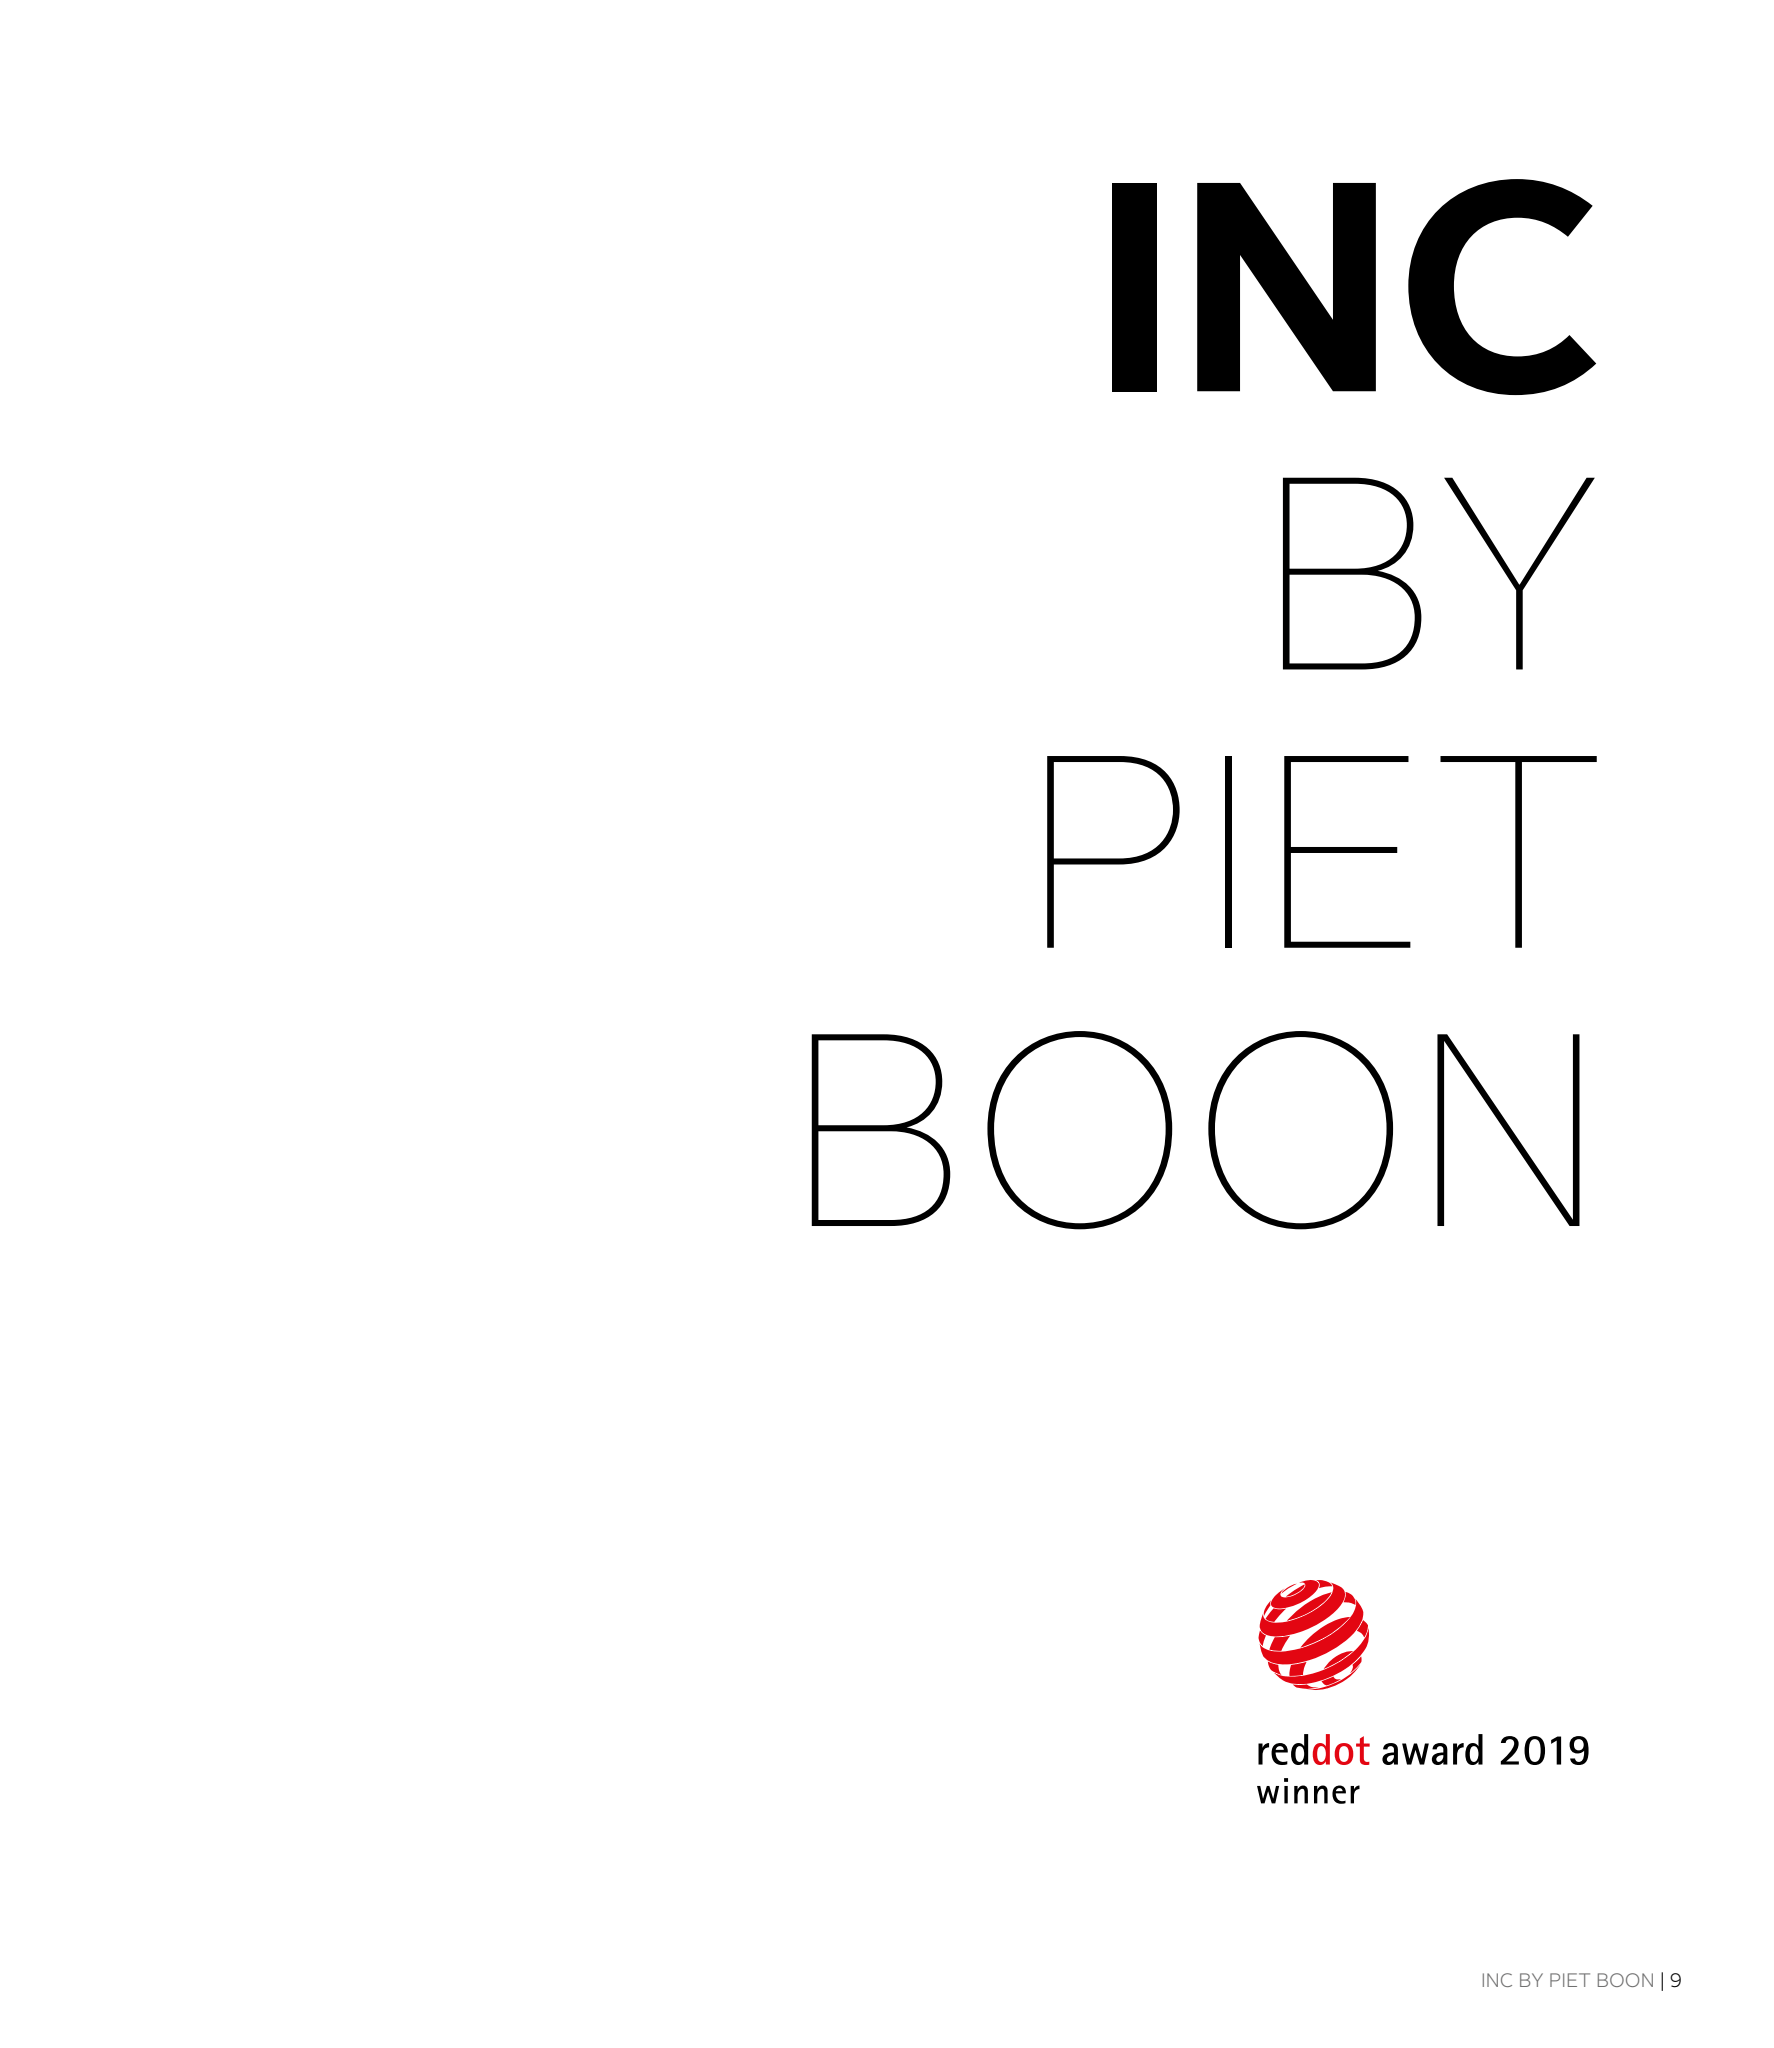 INC by Piet Boon